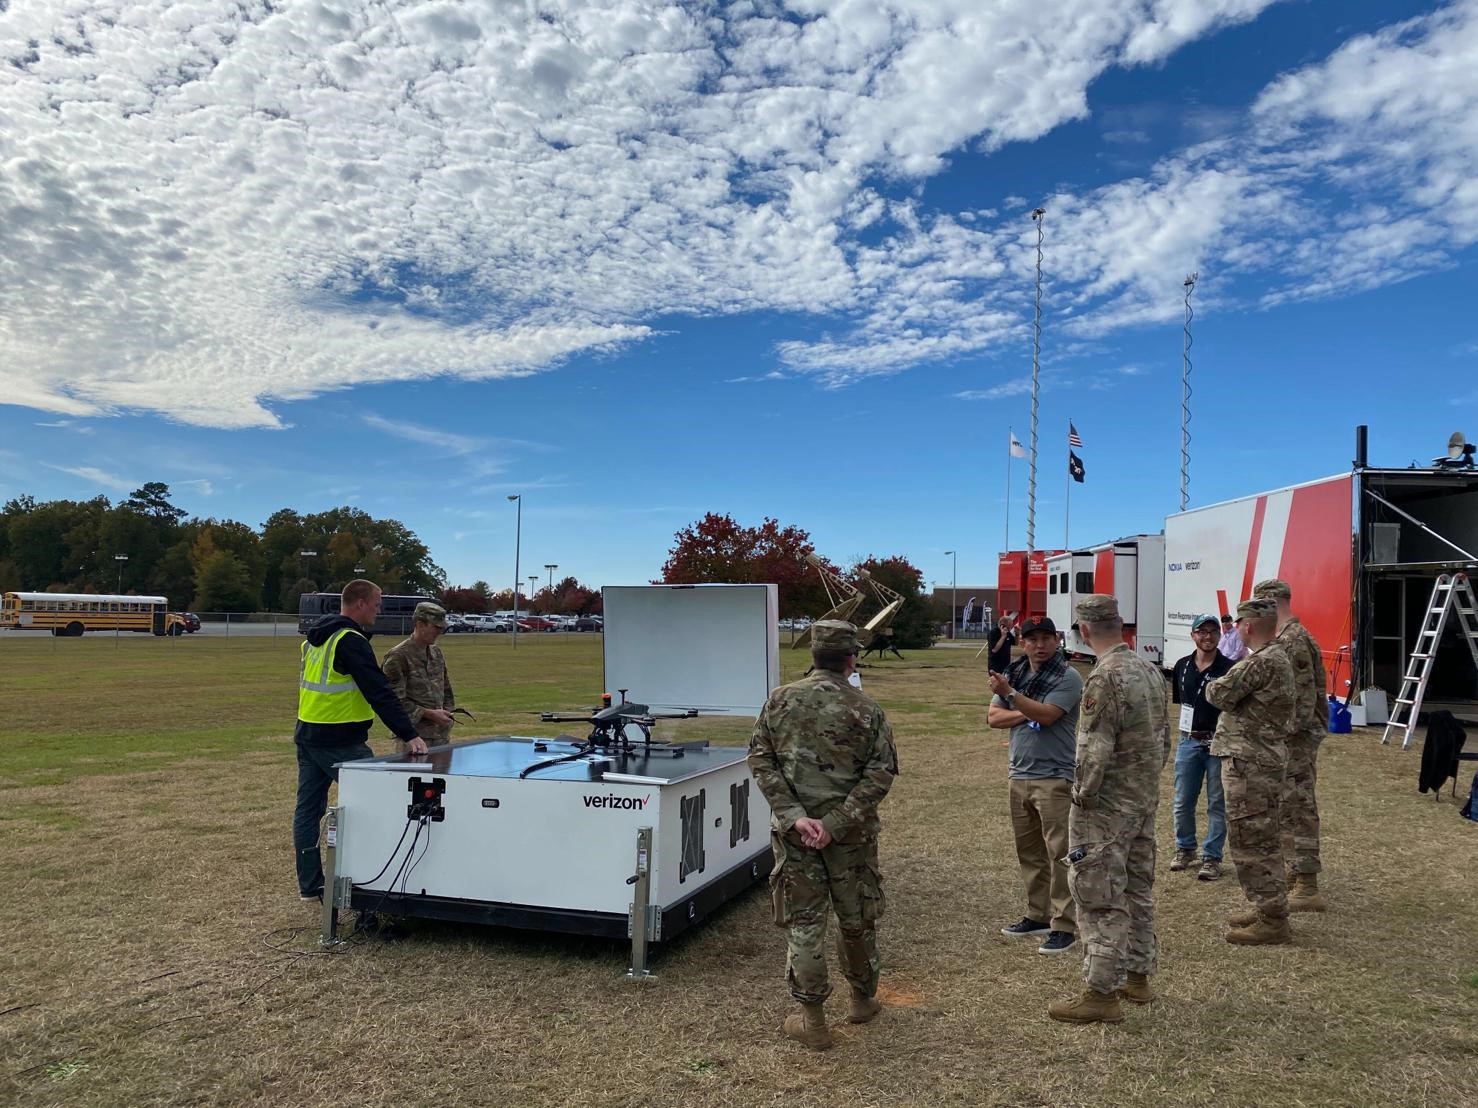 Military personnel prepares an Asylon security drone for takeoff.